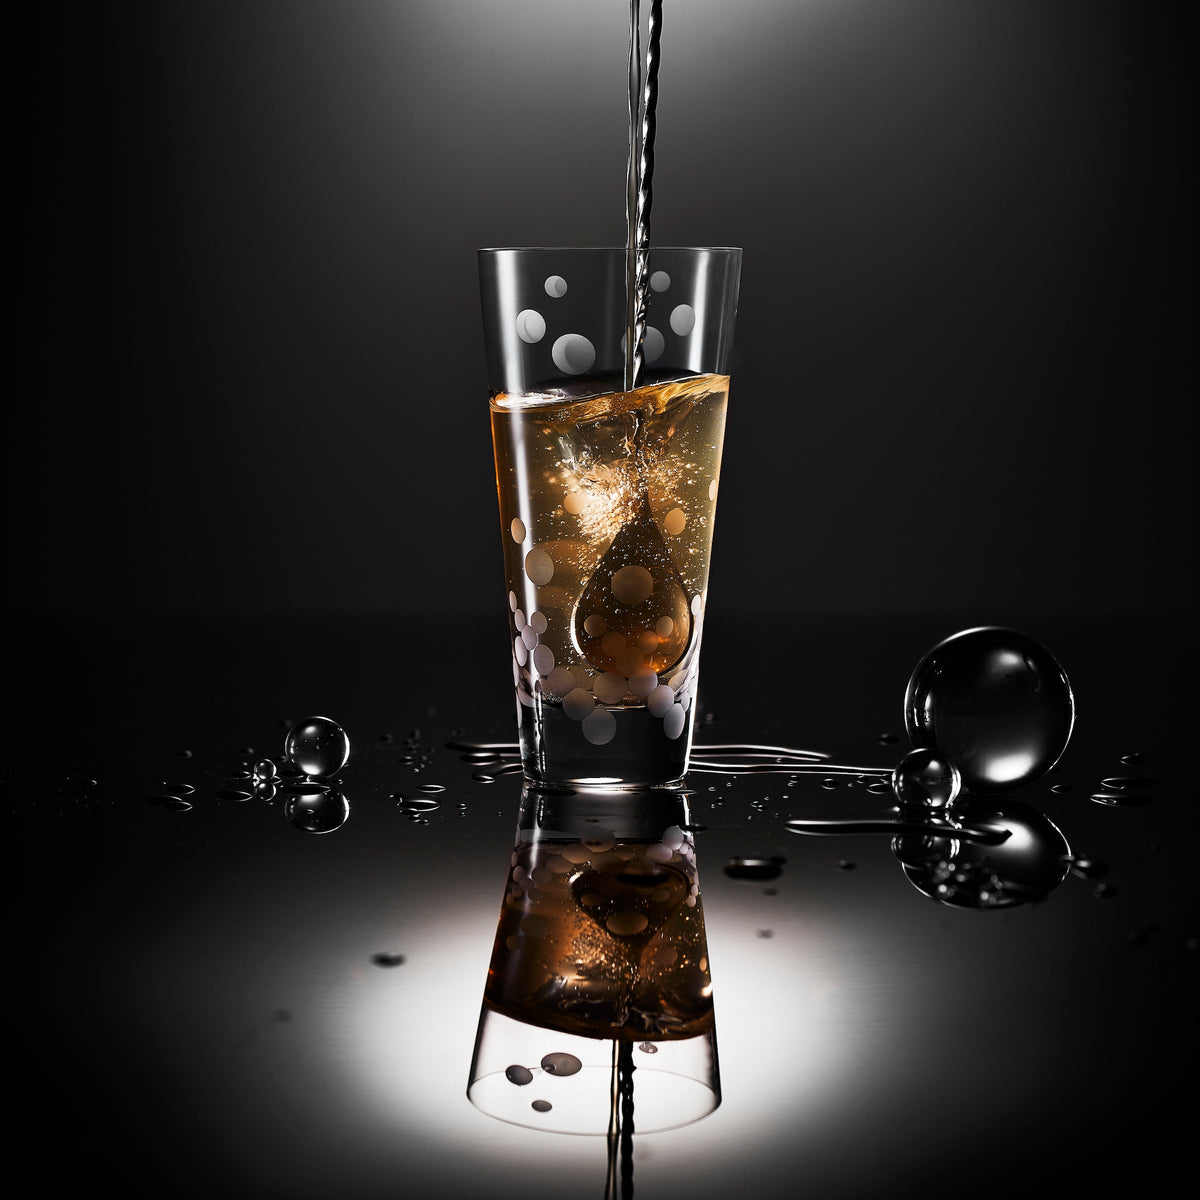 A glass of iced coffee is being poured into a Chatham Pop Highball Glass with a polka-dot pattern by Caskata.